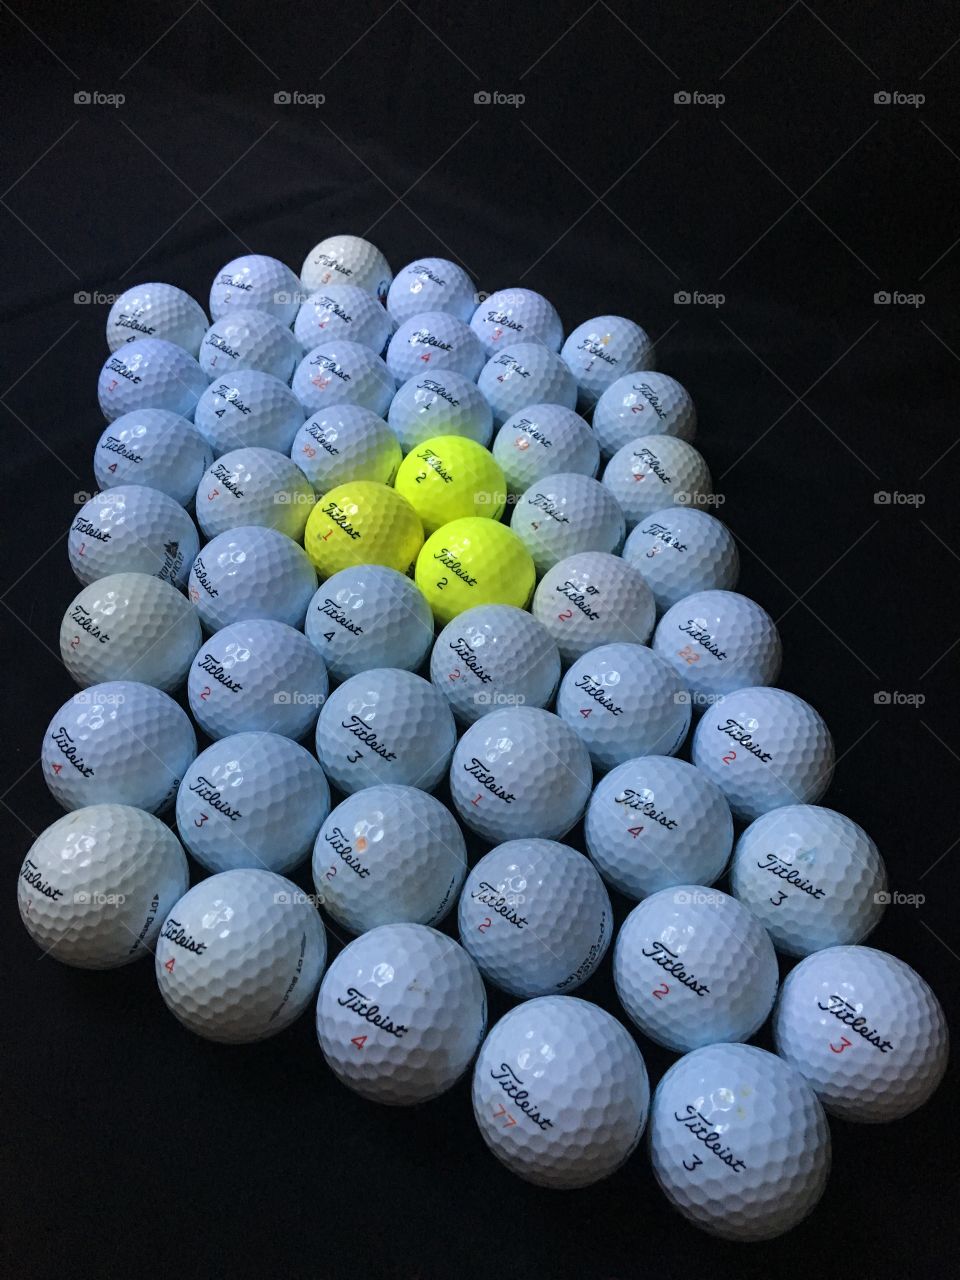 Golf balls, used. Bright yellow and bright white close up. 